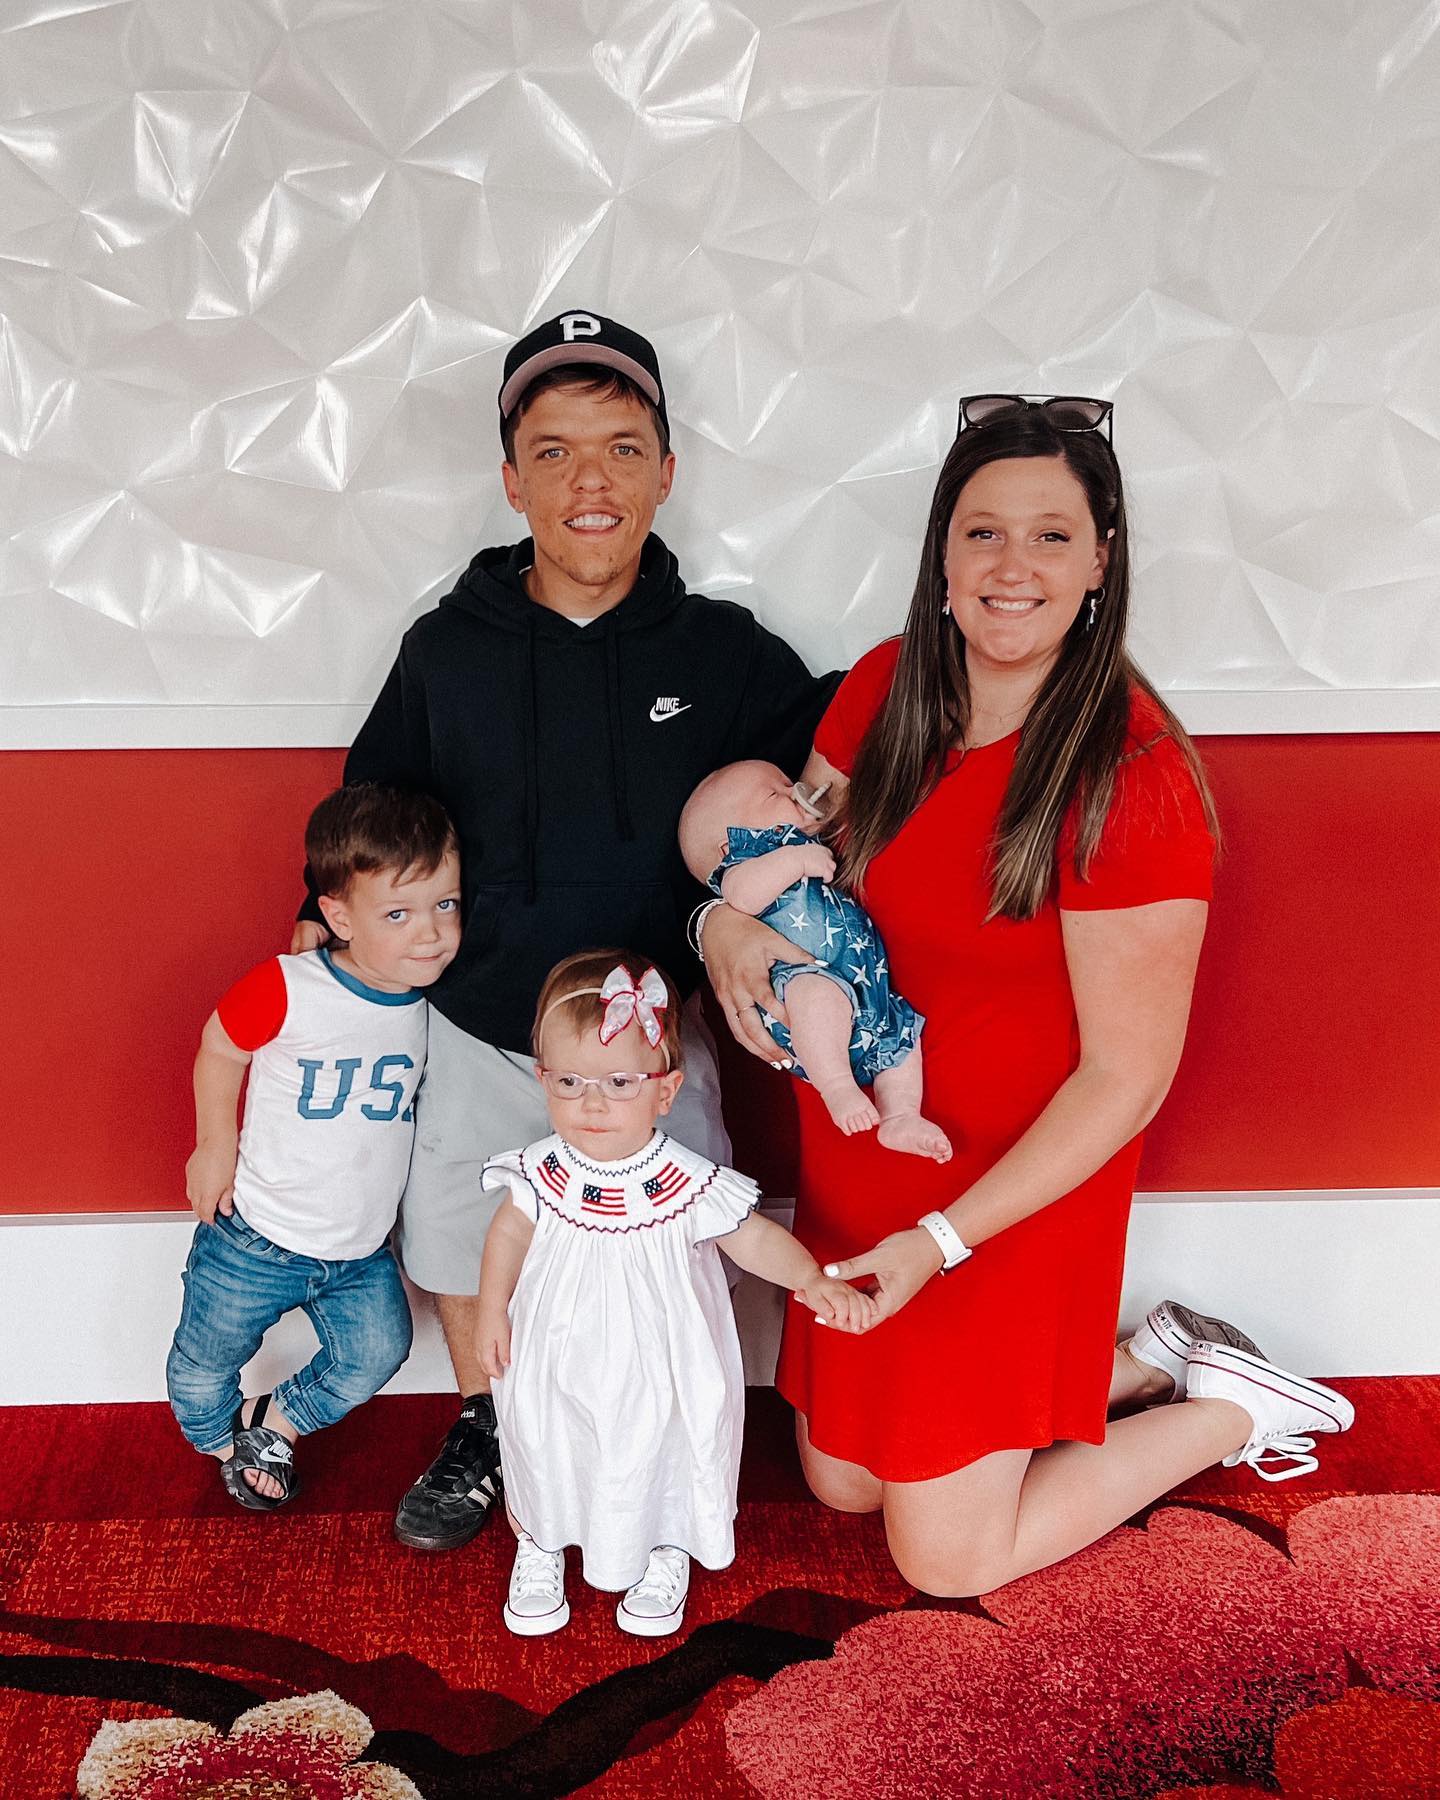 Zach and Tori Roloff Host Rodeo Bash for Josiah’s 1st Birthday